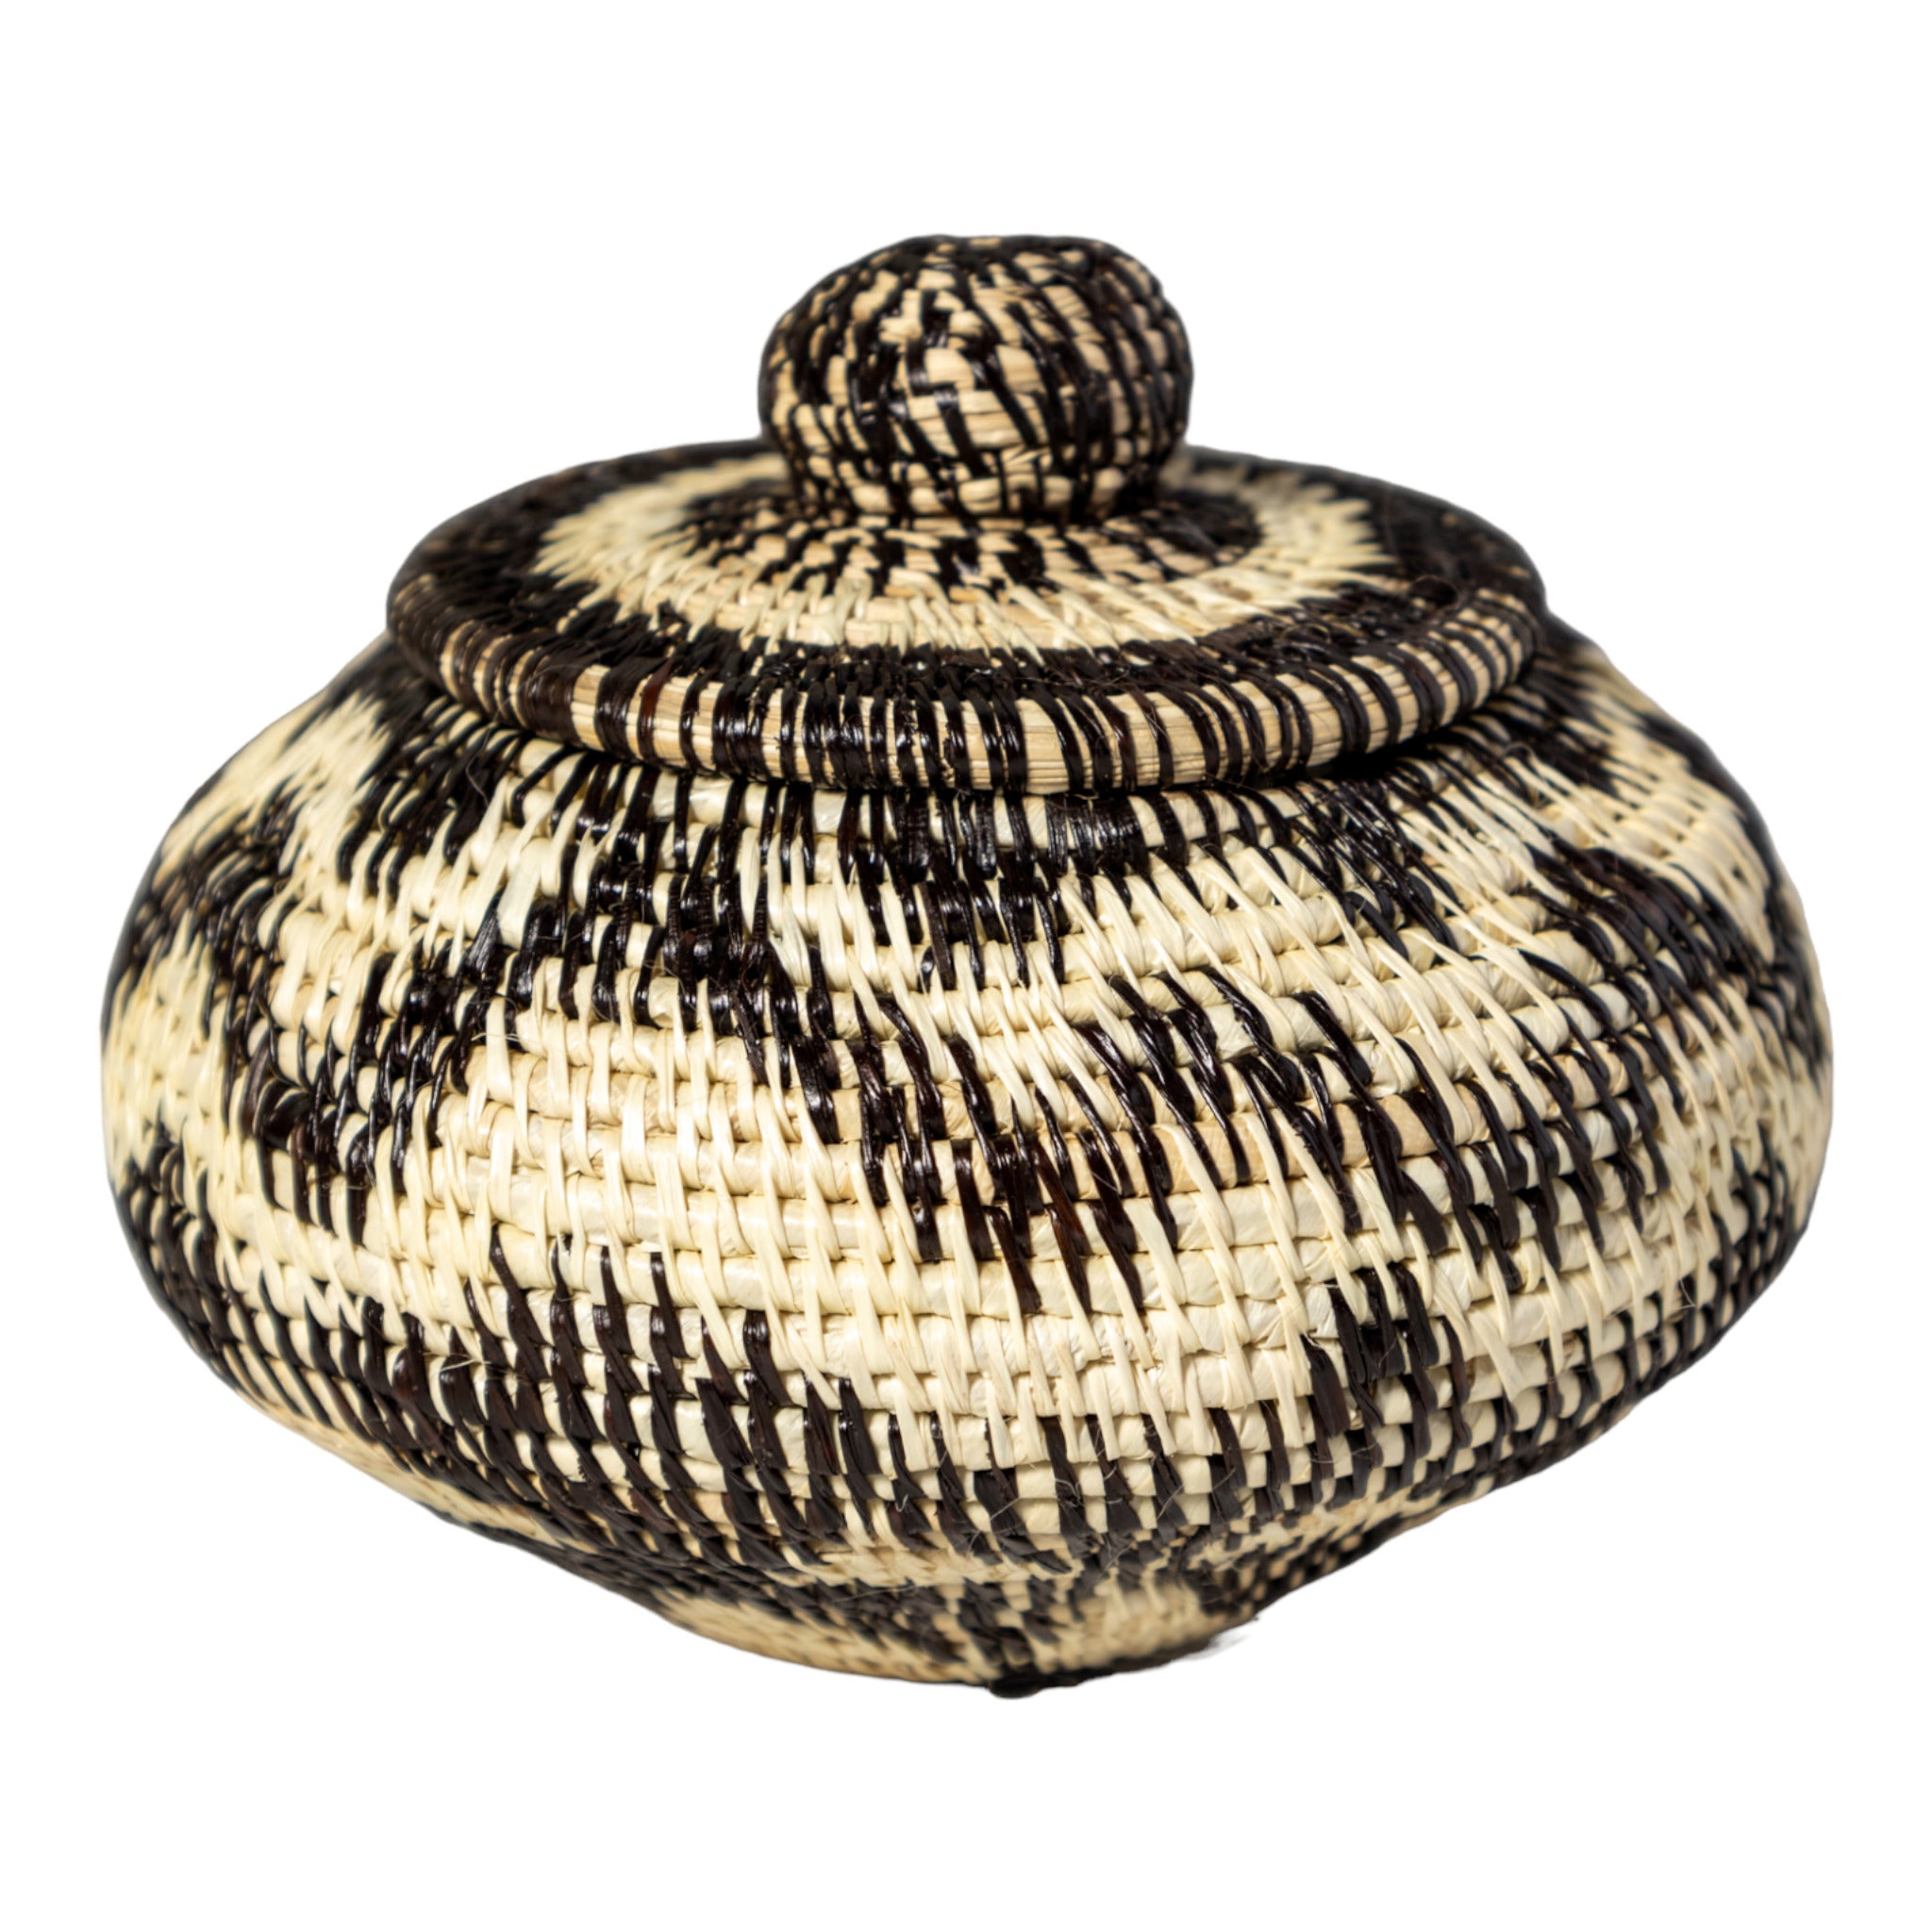 Small Black And White Rainforest Basket With Top